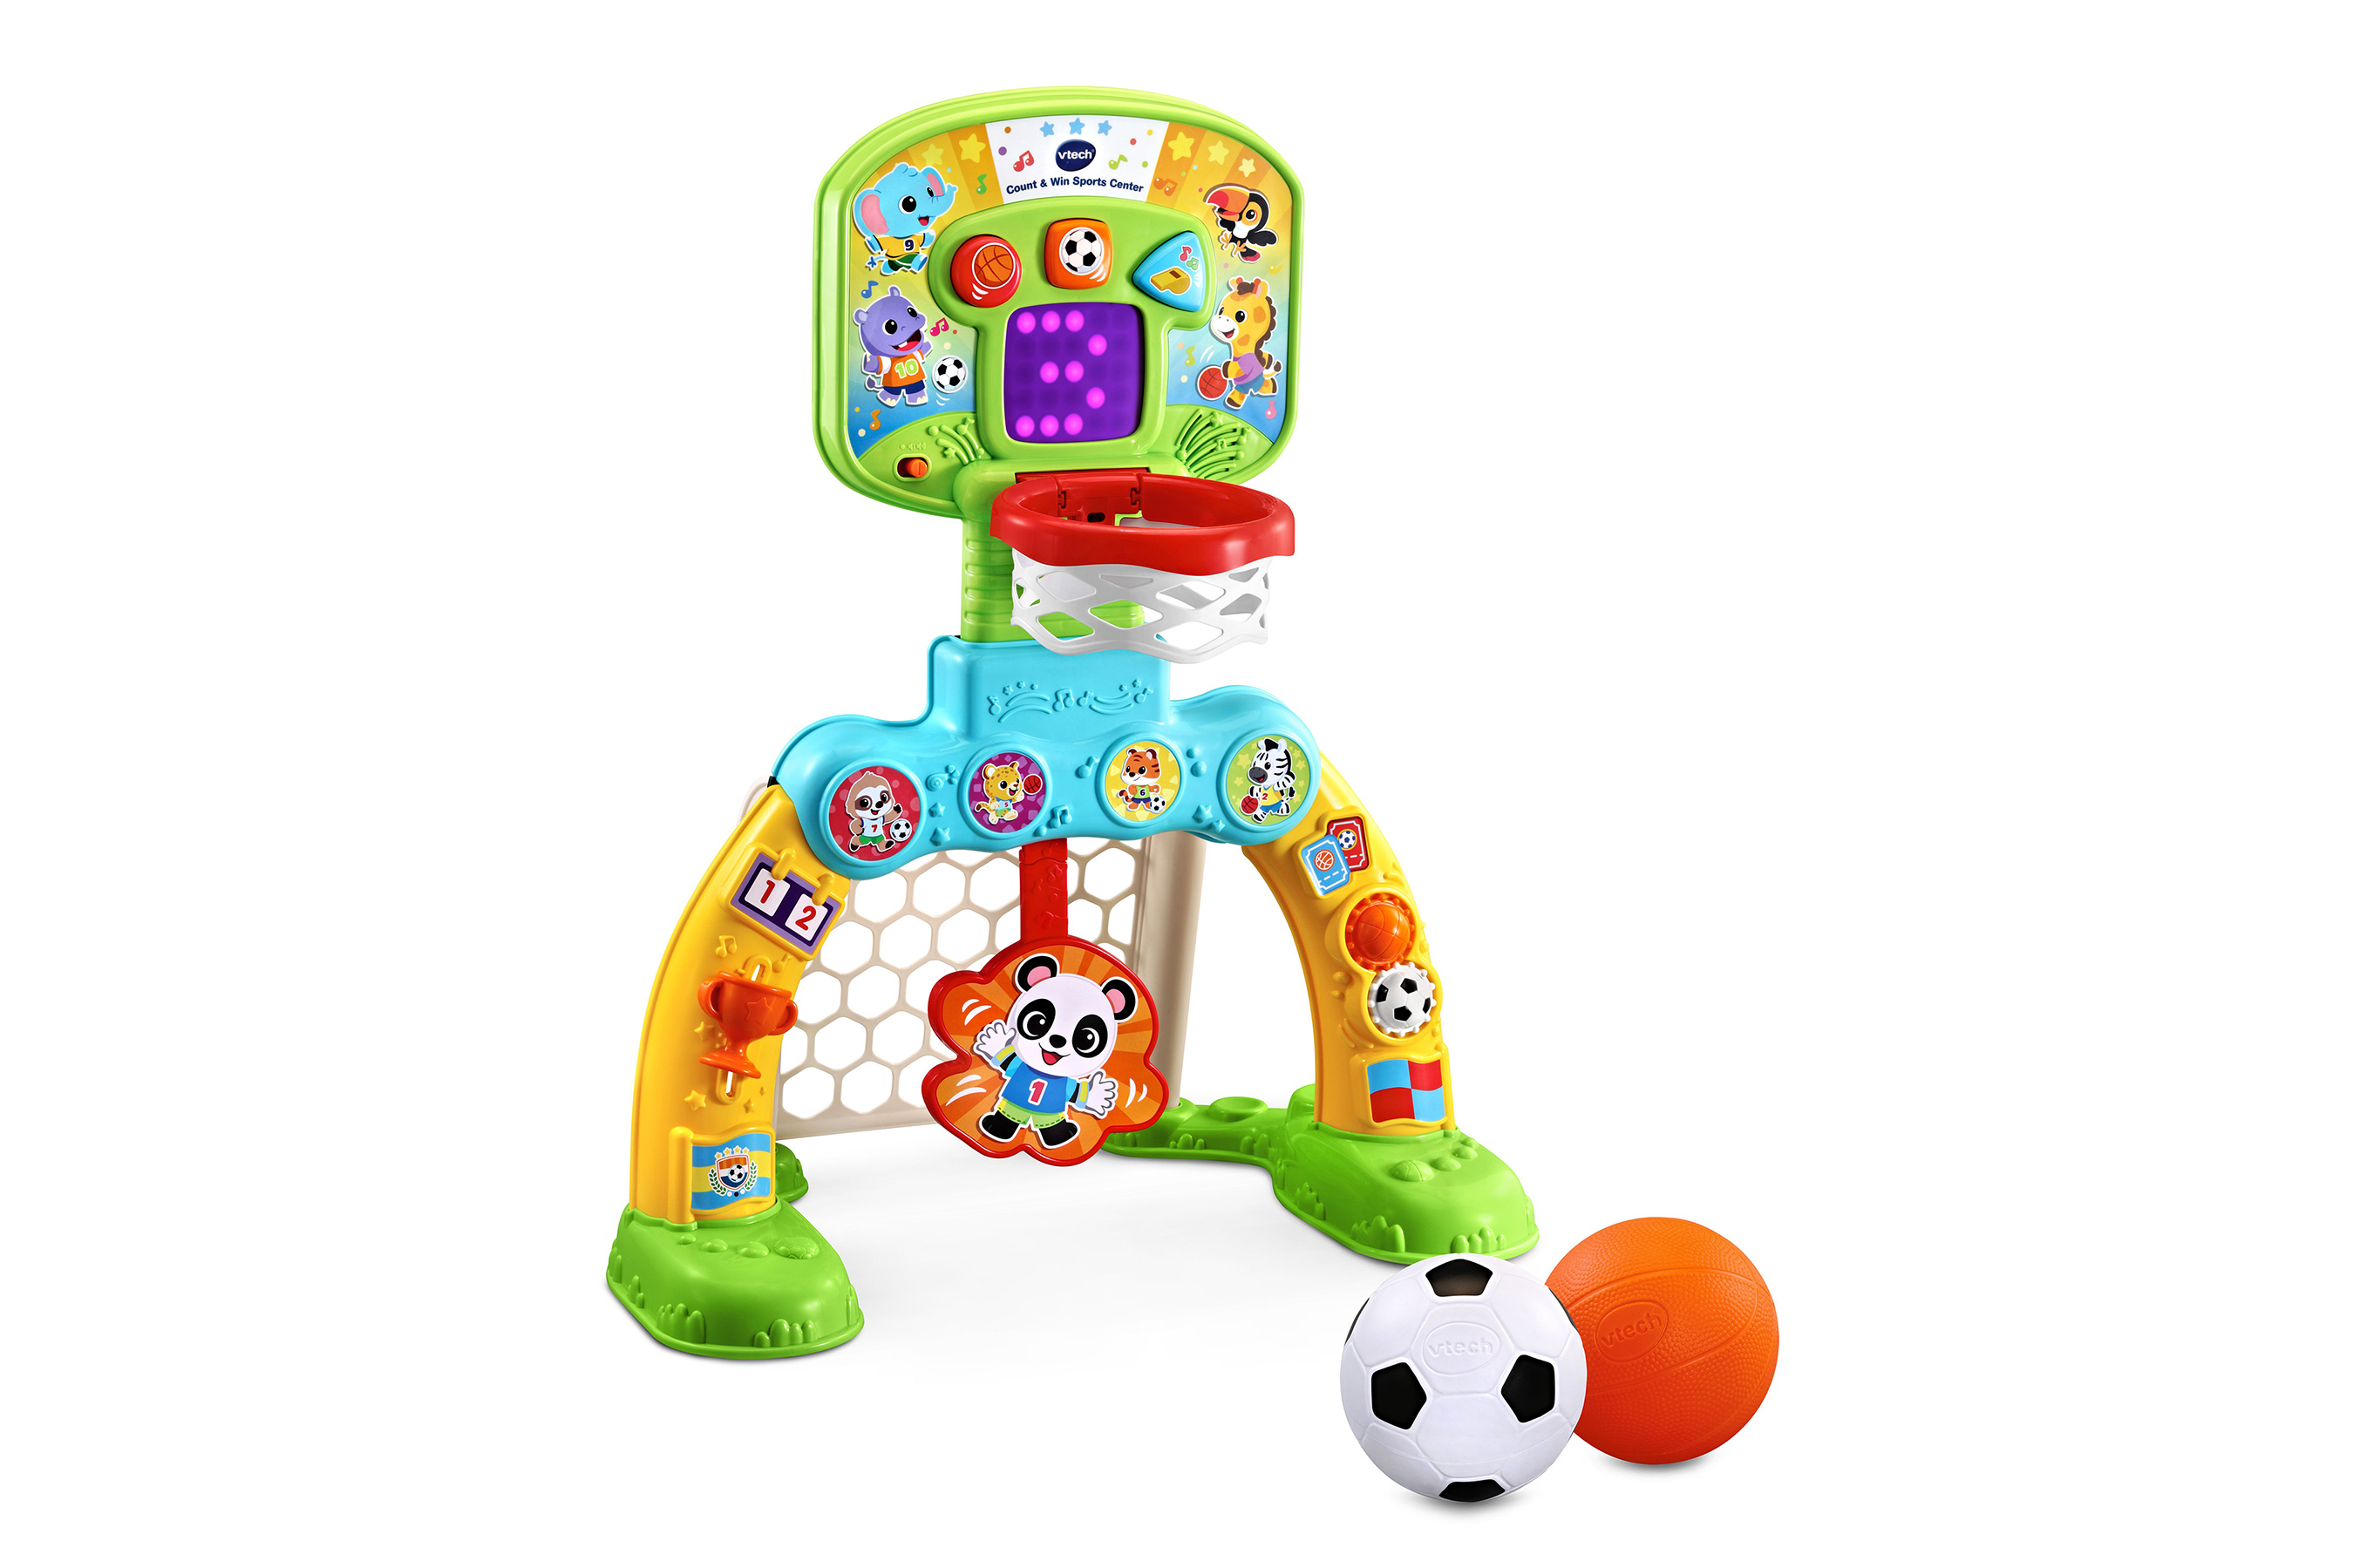 VTech Count Win Sports Center toy set